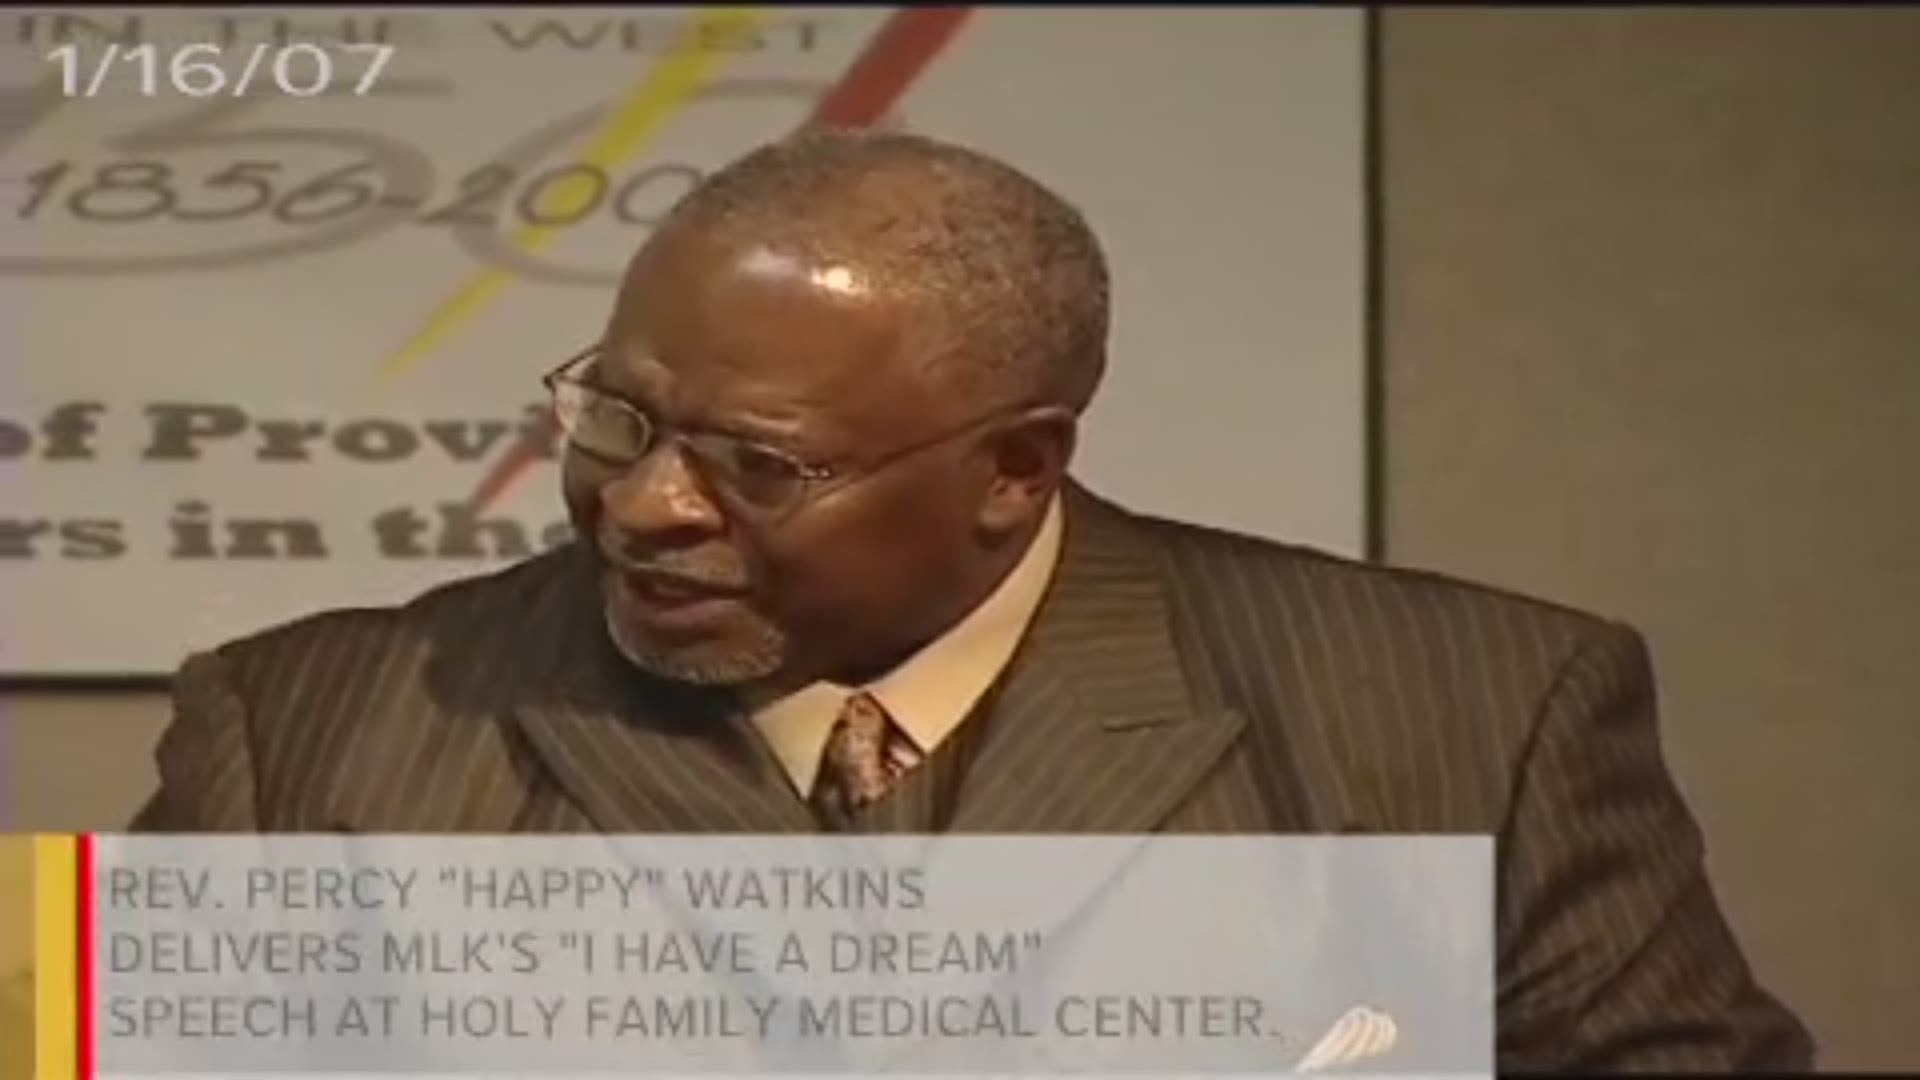 Rev. Percy 'Happy' Watkins delivers Martin Luther King, Jr.'s famous 'I have a dream' speech at Holy Family Medical Center